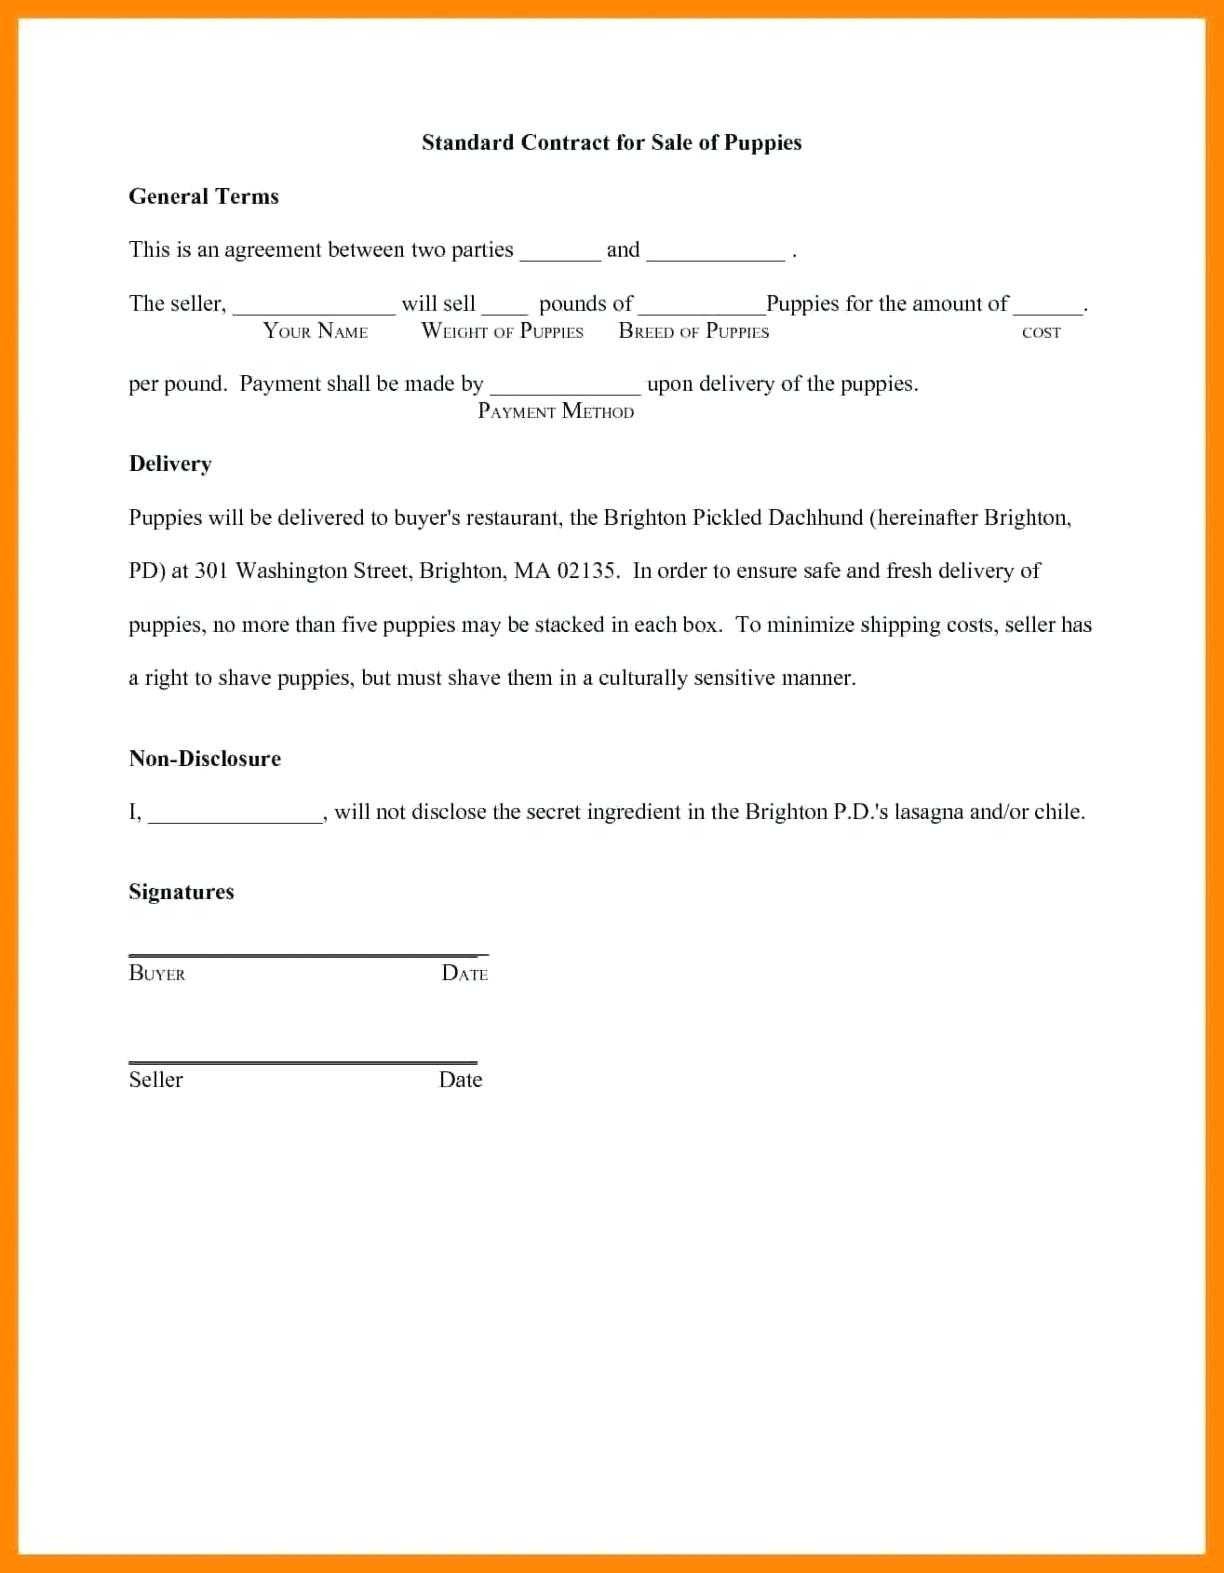 Royalty Based Financing Agreement Awesome Template